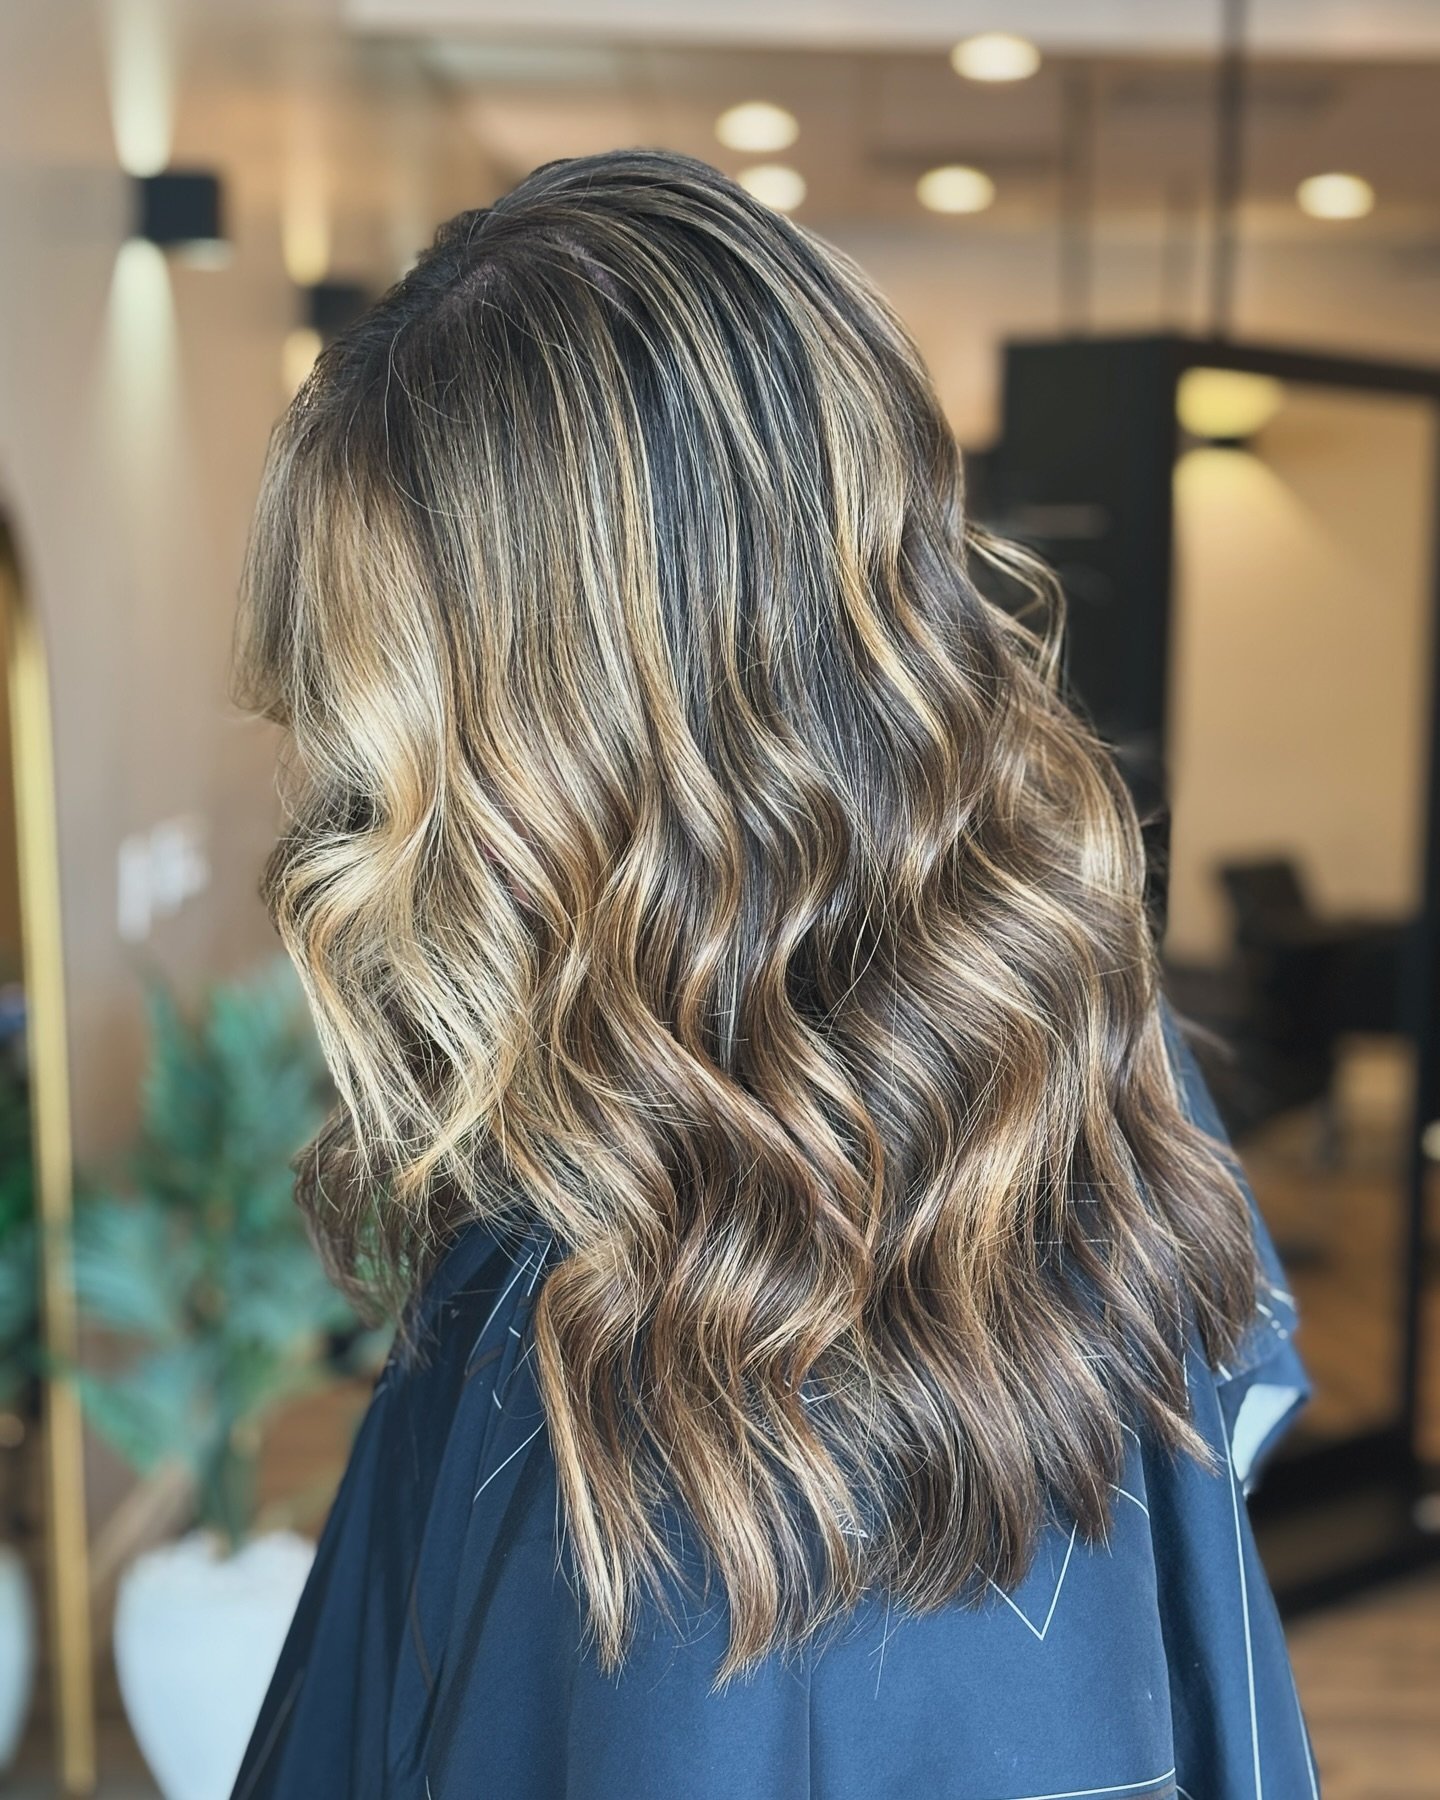 BRONDE HAIR 💫

Lived in color has the most flawless grow out. It&rsquo;s perfect for someone that doesn&rsquo;t want to come in every 6 weeks. 

We want you to have hair the fits your lifestyle the most. We also do complementary consultations. Not s